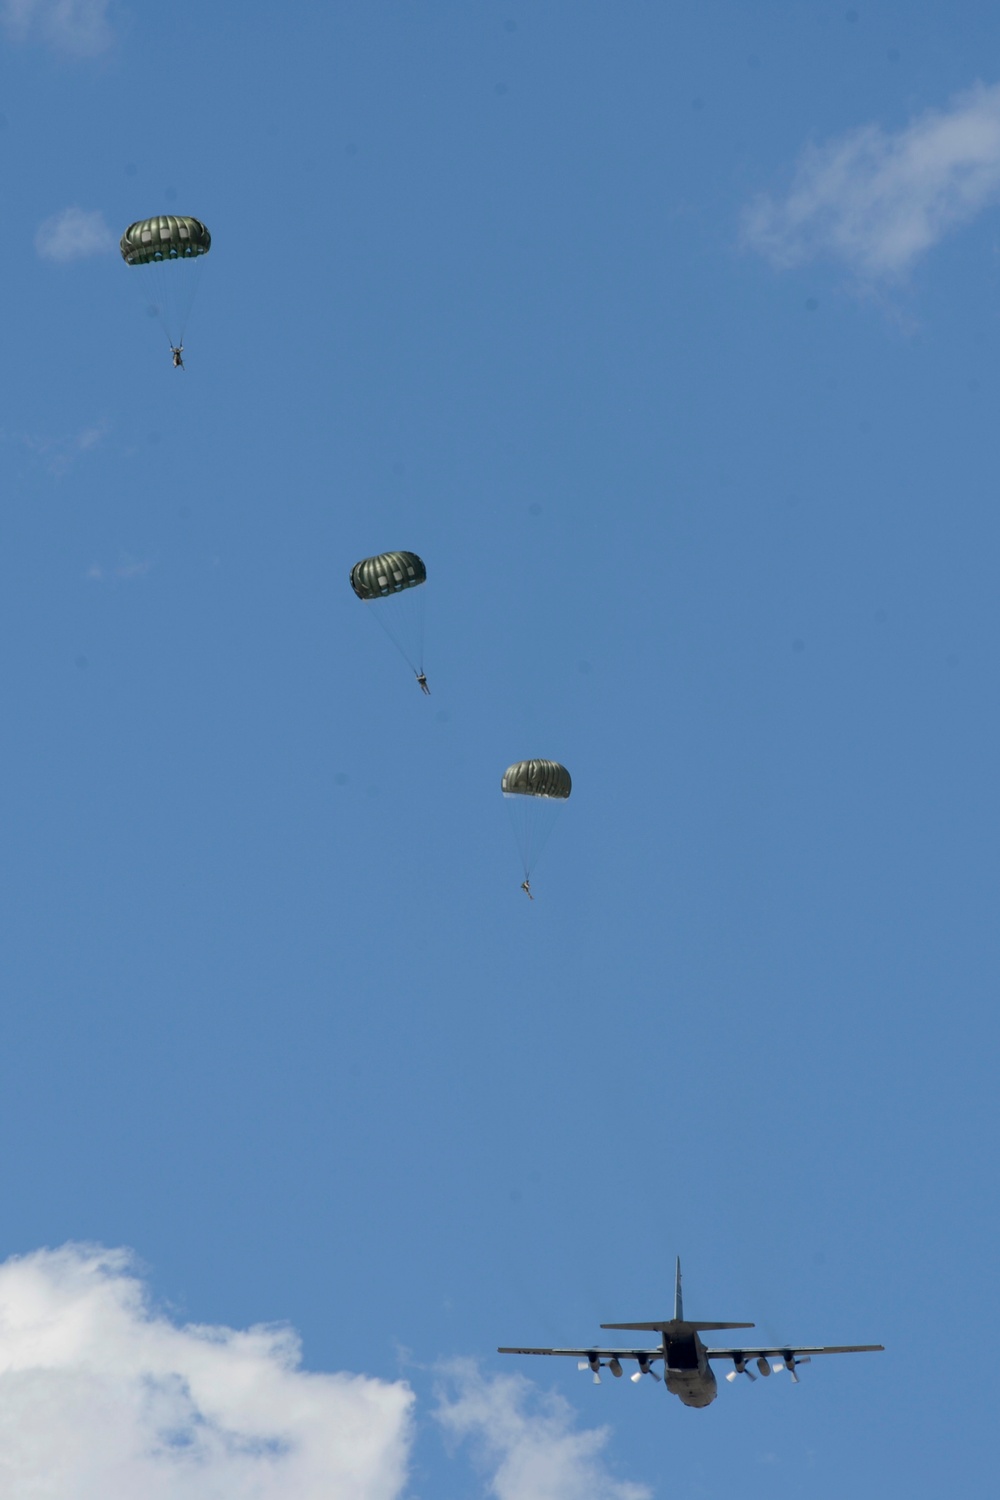 US Army National Guard Global 1 Drop zone